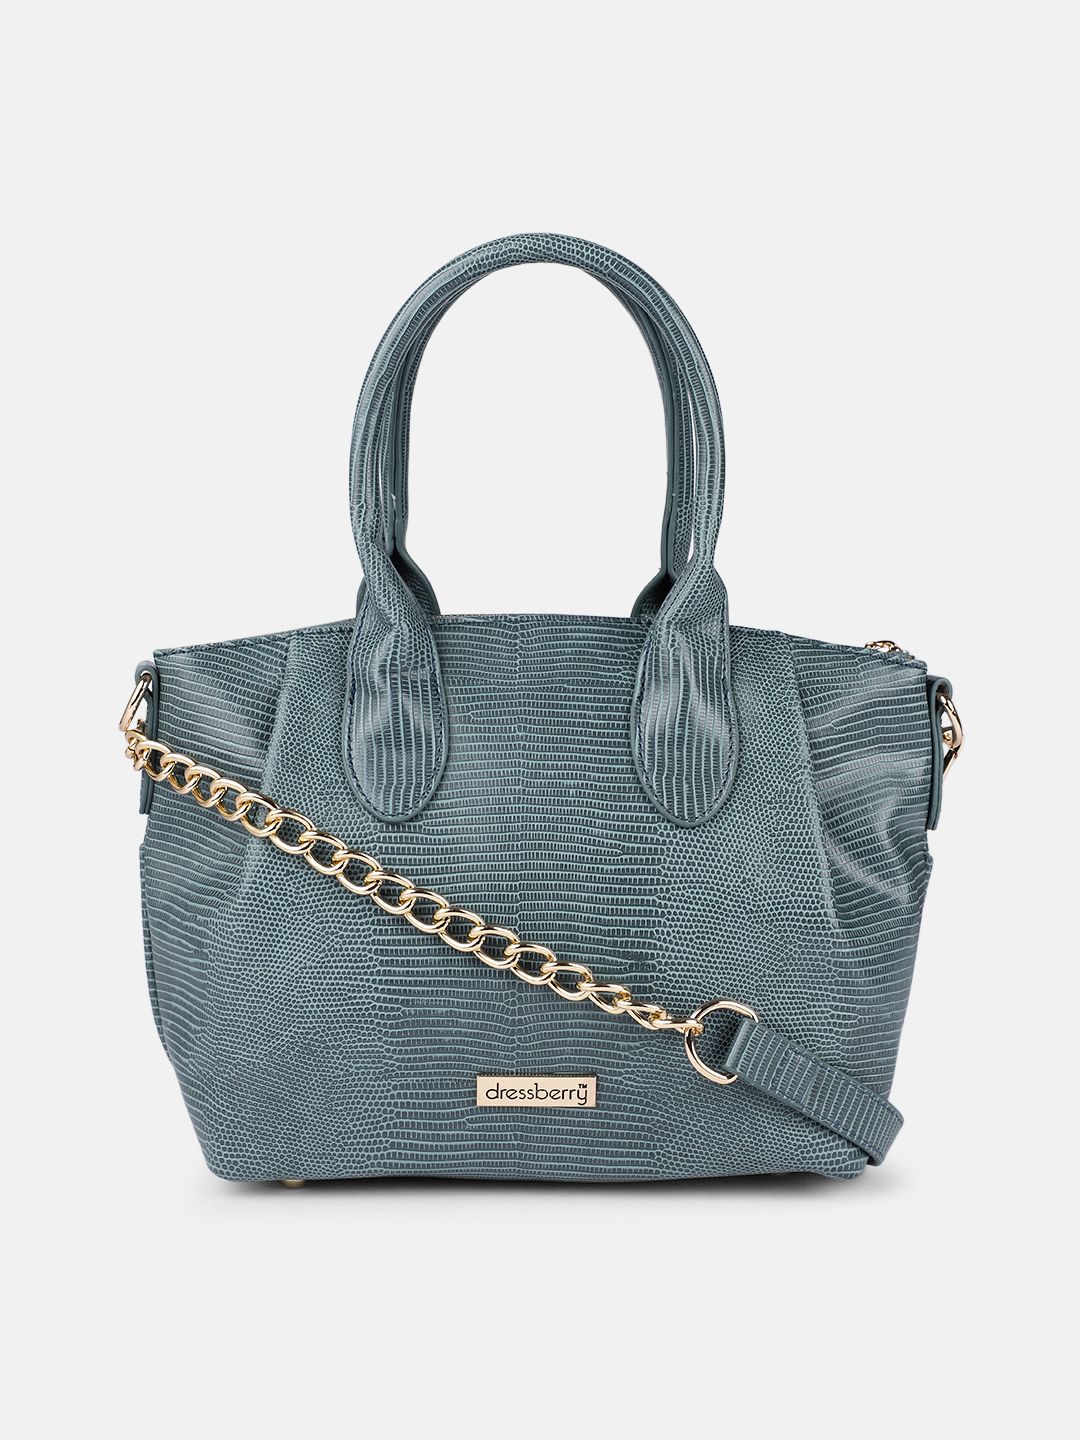 DressBerry Blue Animal Textured Structured Handheld Bag Price in India